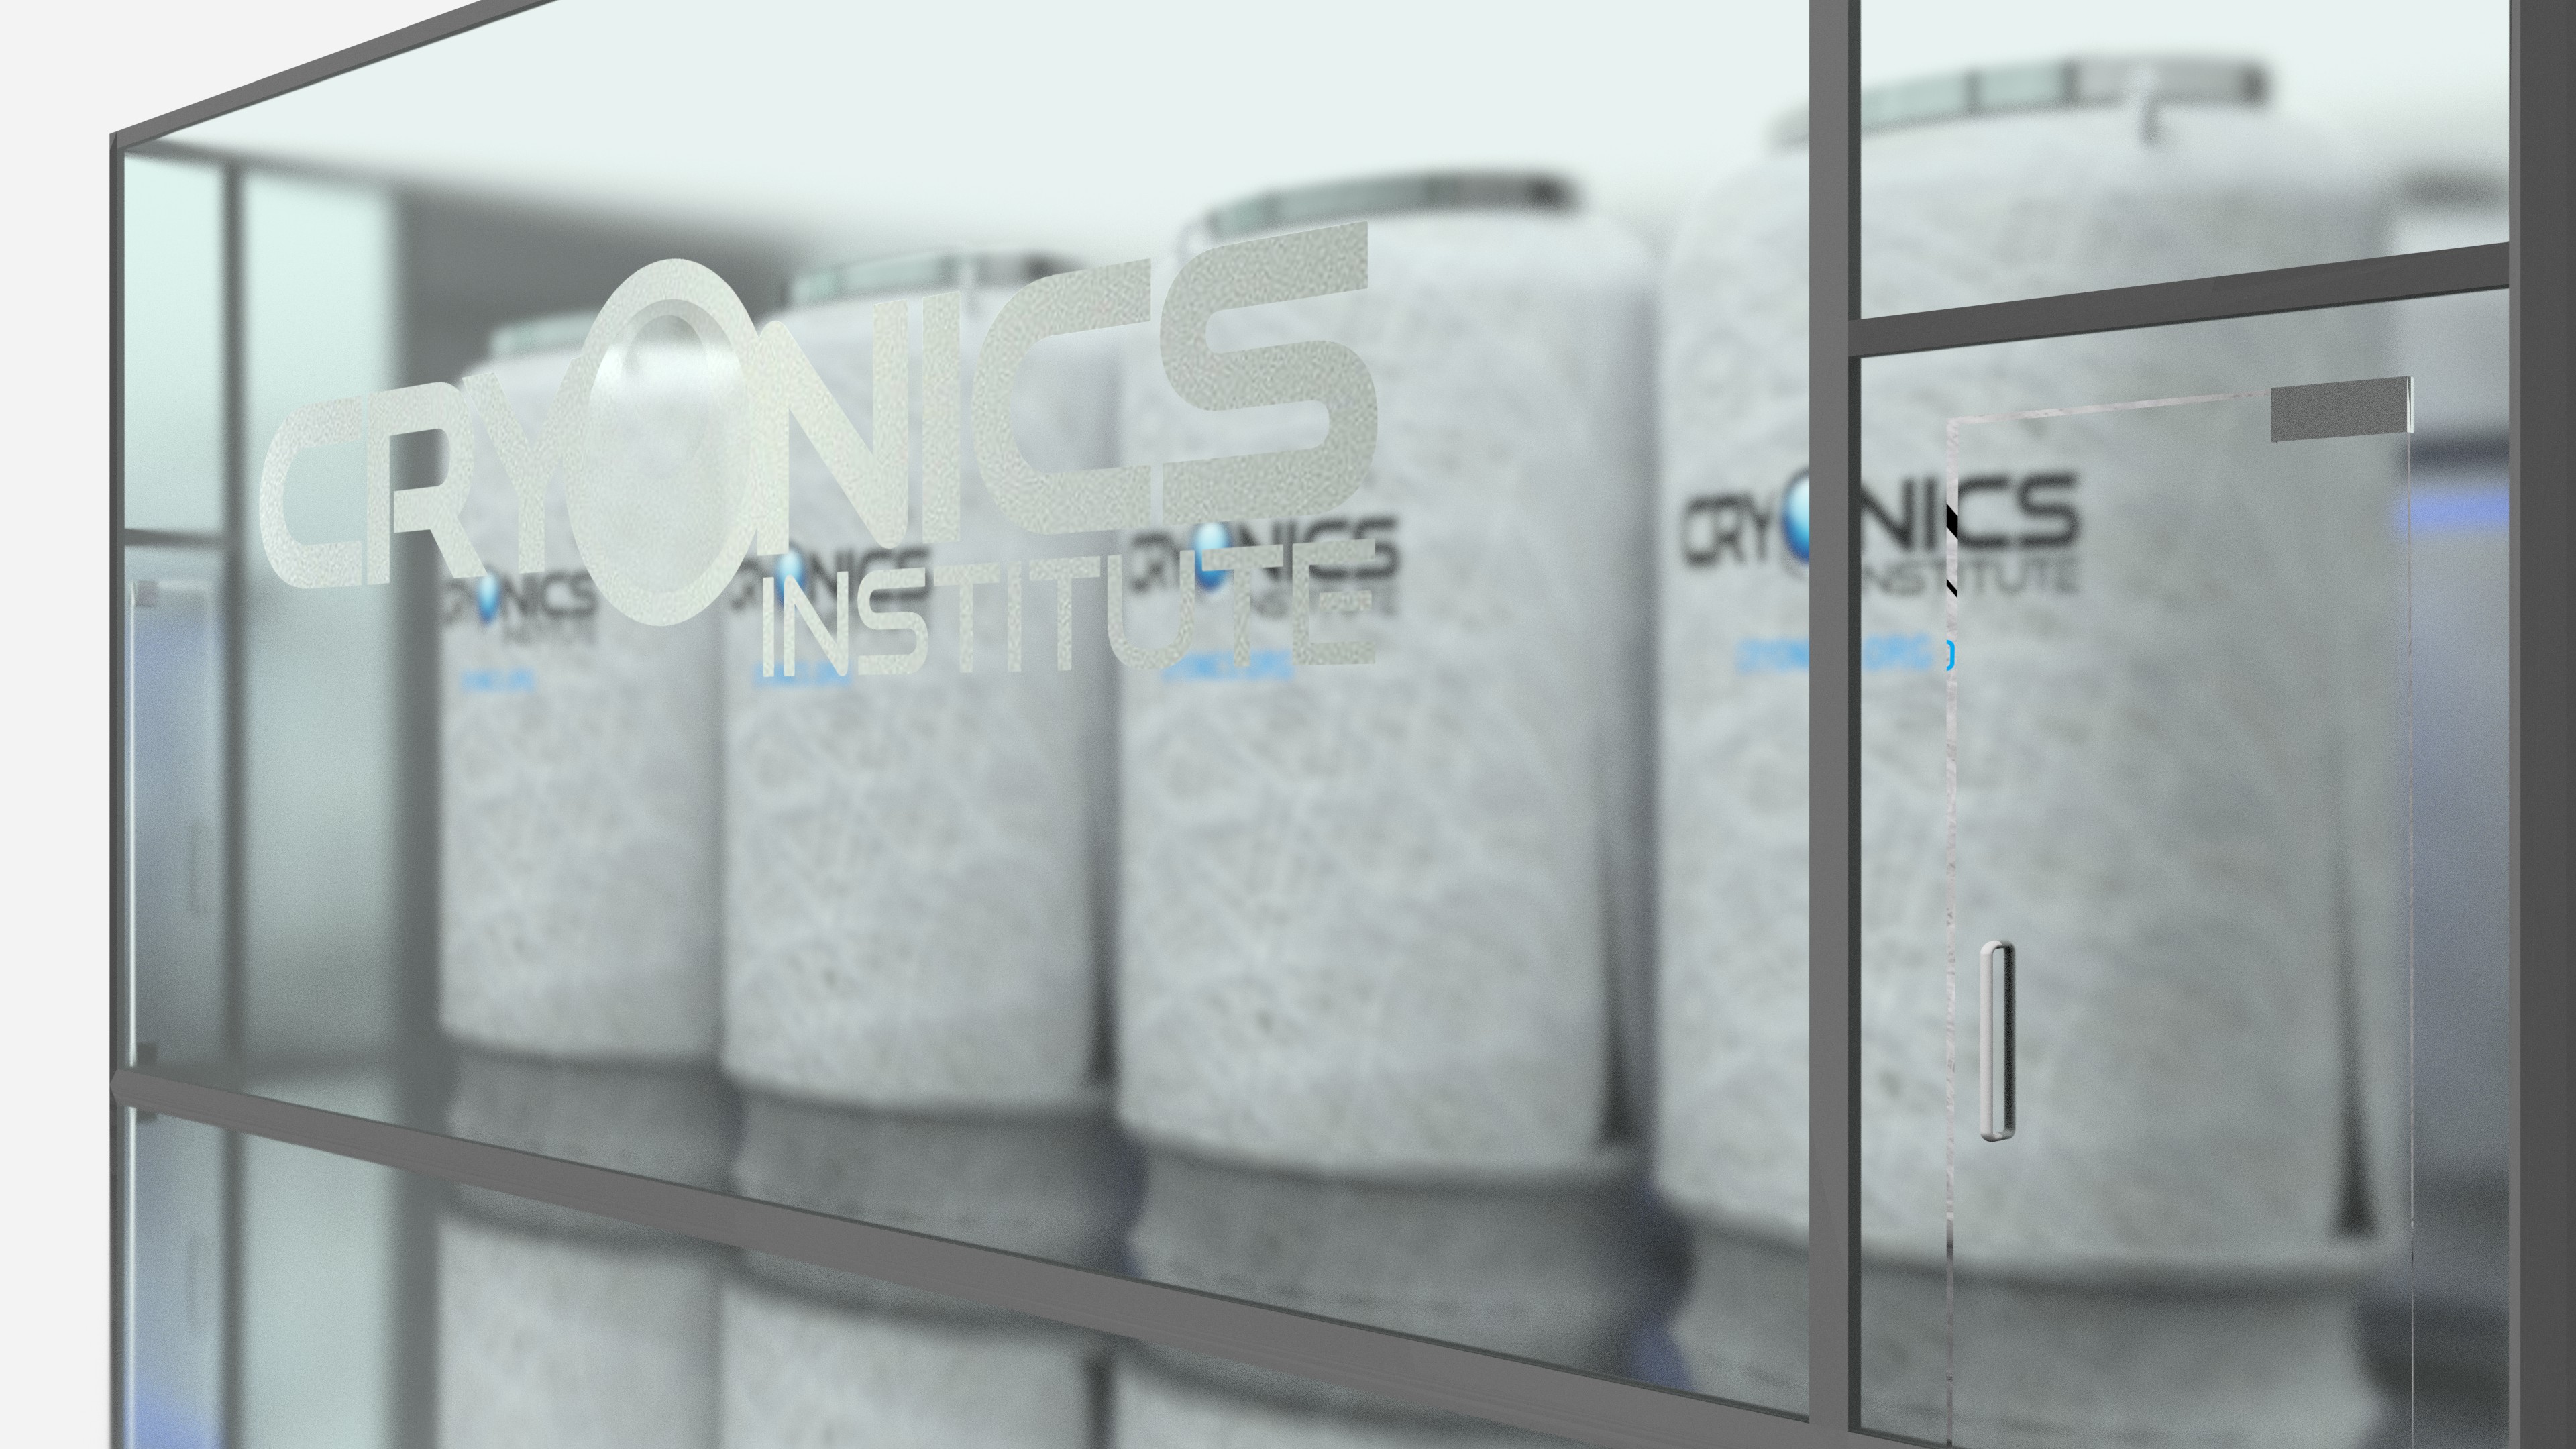 Cryonics, Cryonics Institute Wallpaper